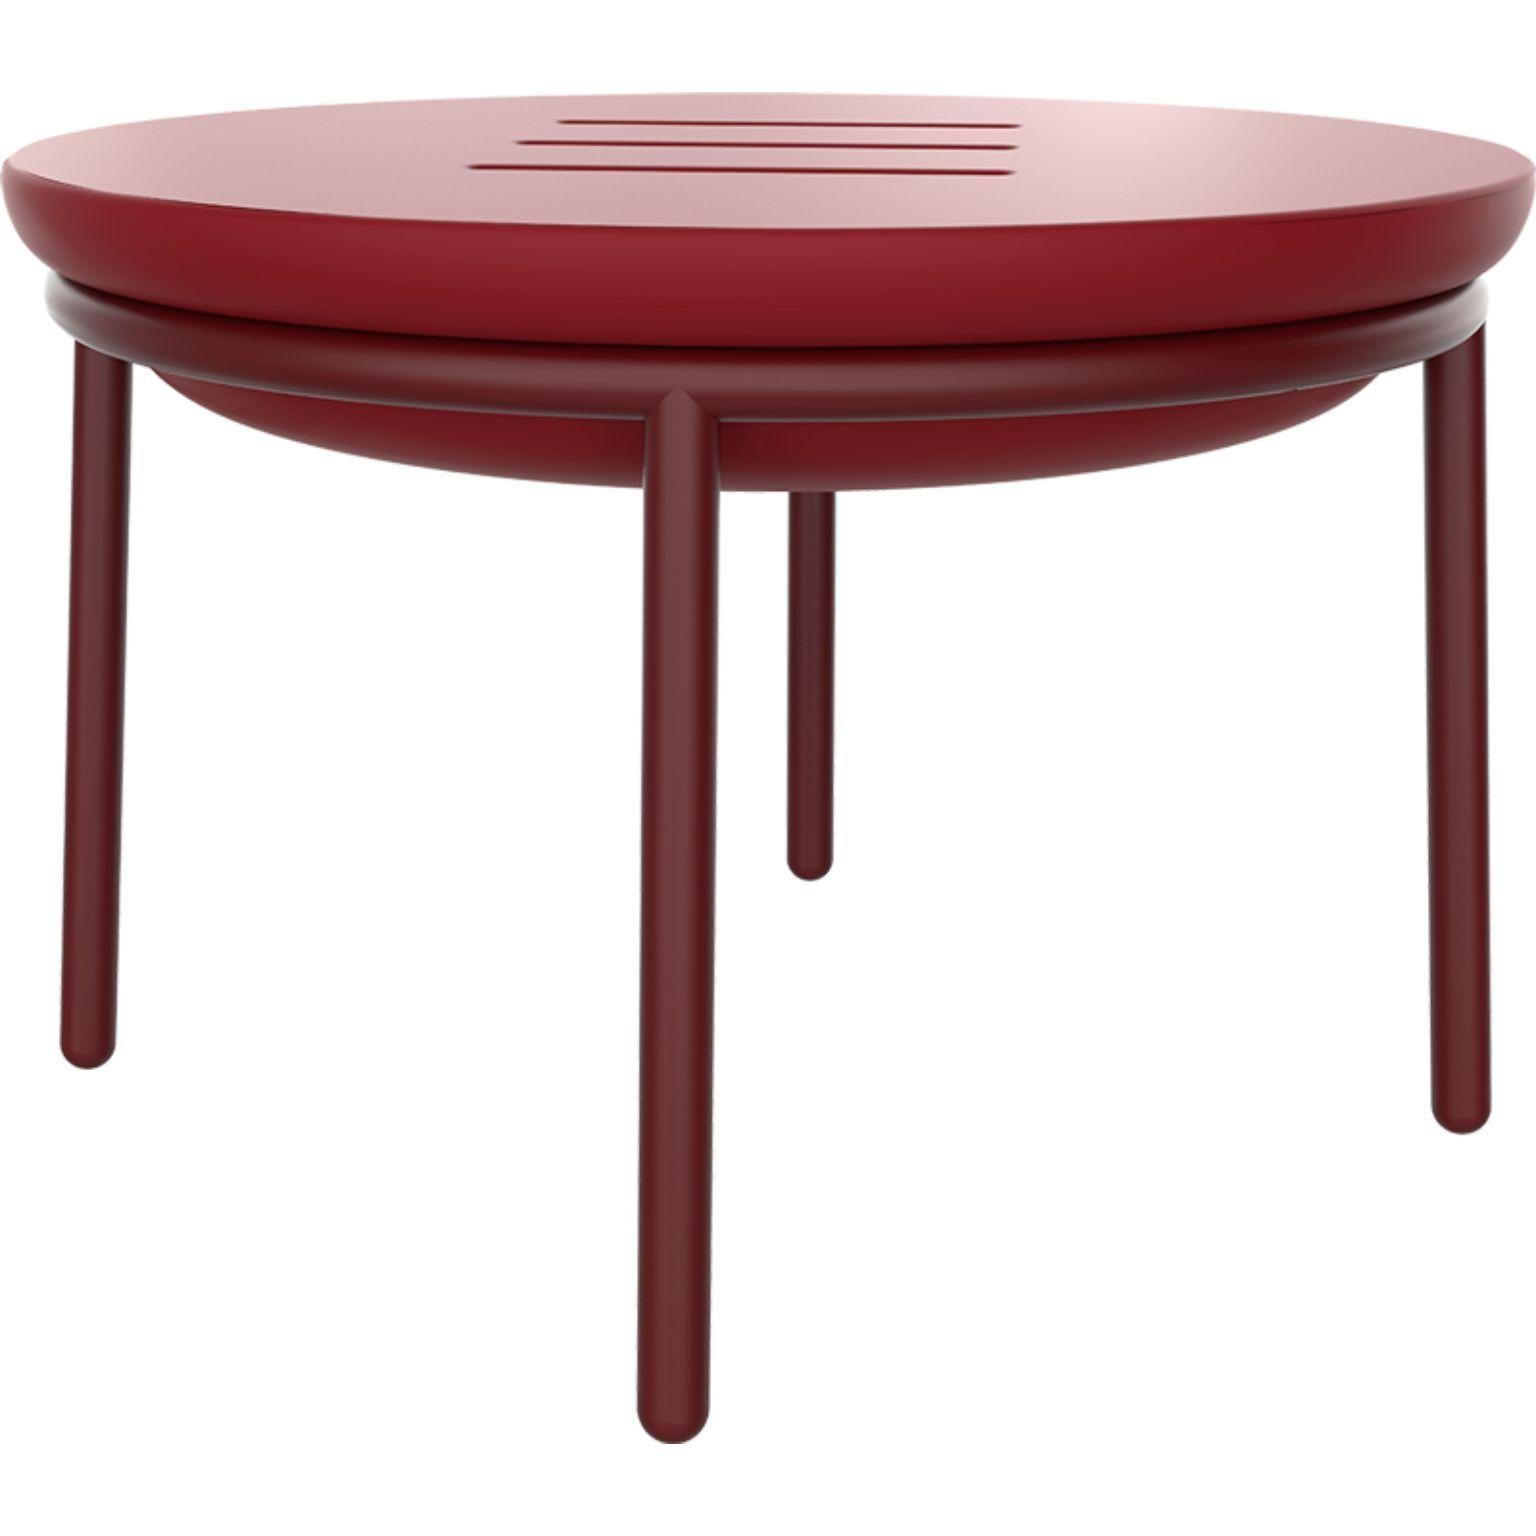 Lace burgundy 60 low table by MOWEE
Dimensions: Ø60 x H41 cm
Material: polyethylene and stainless steel.
Weight: 6.2 kg.
Also available in different colors and finishes (lacquered).

Lace is a collection of furniture made by rotomoulding. Its